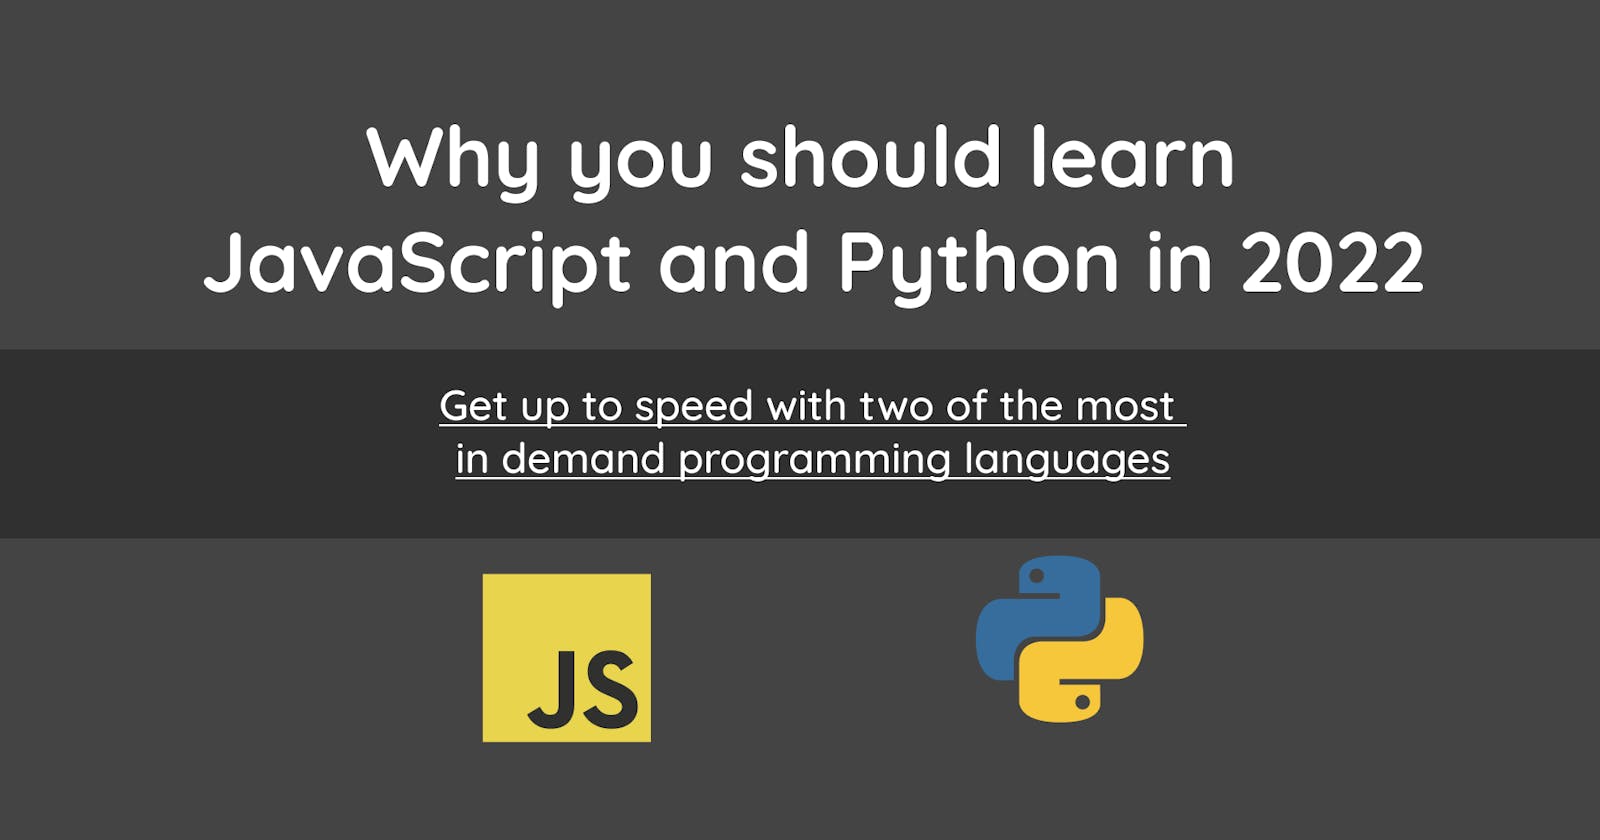 Why you should learn JavaScript and Python in 2022